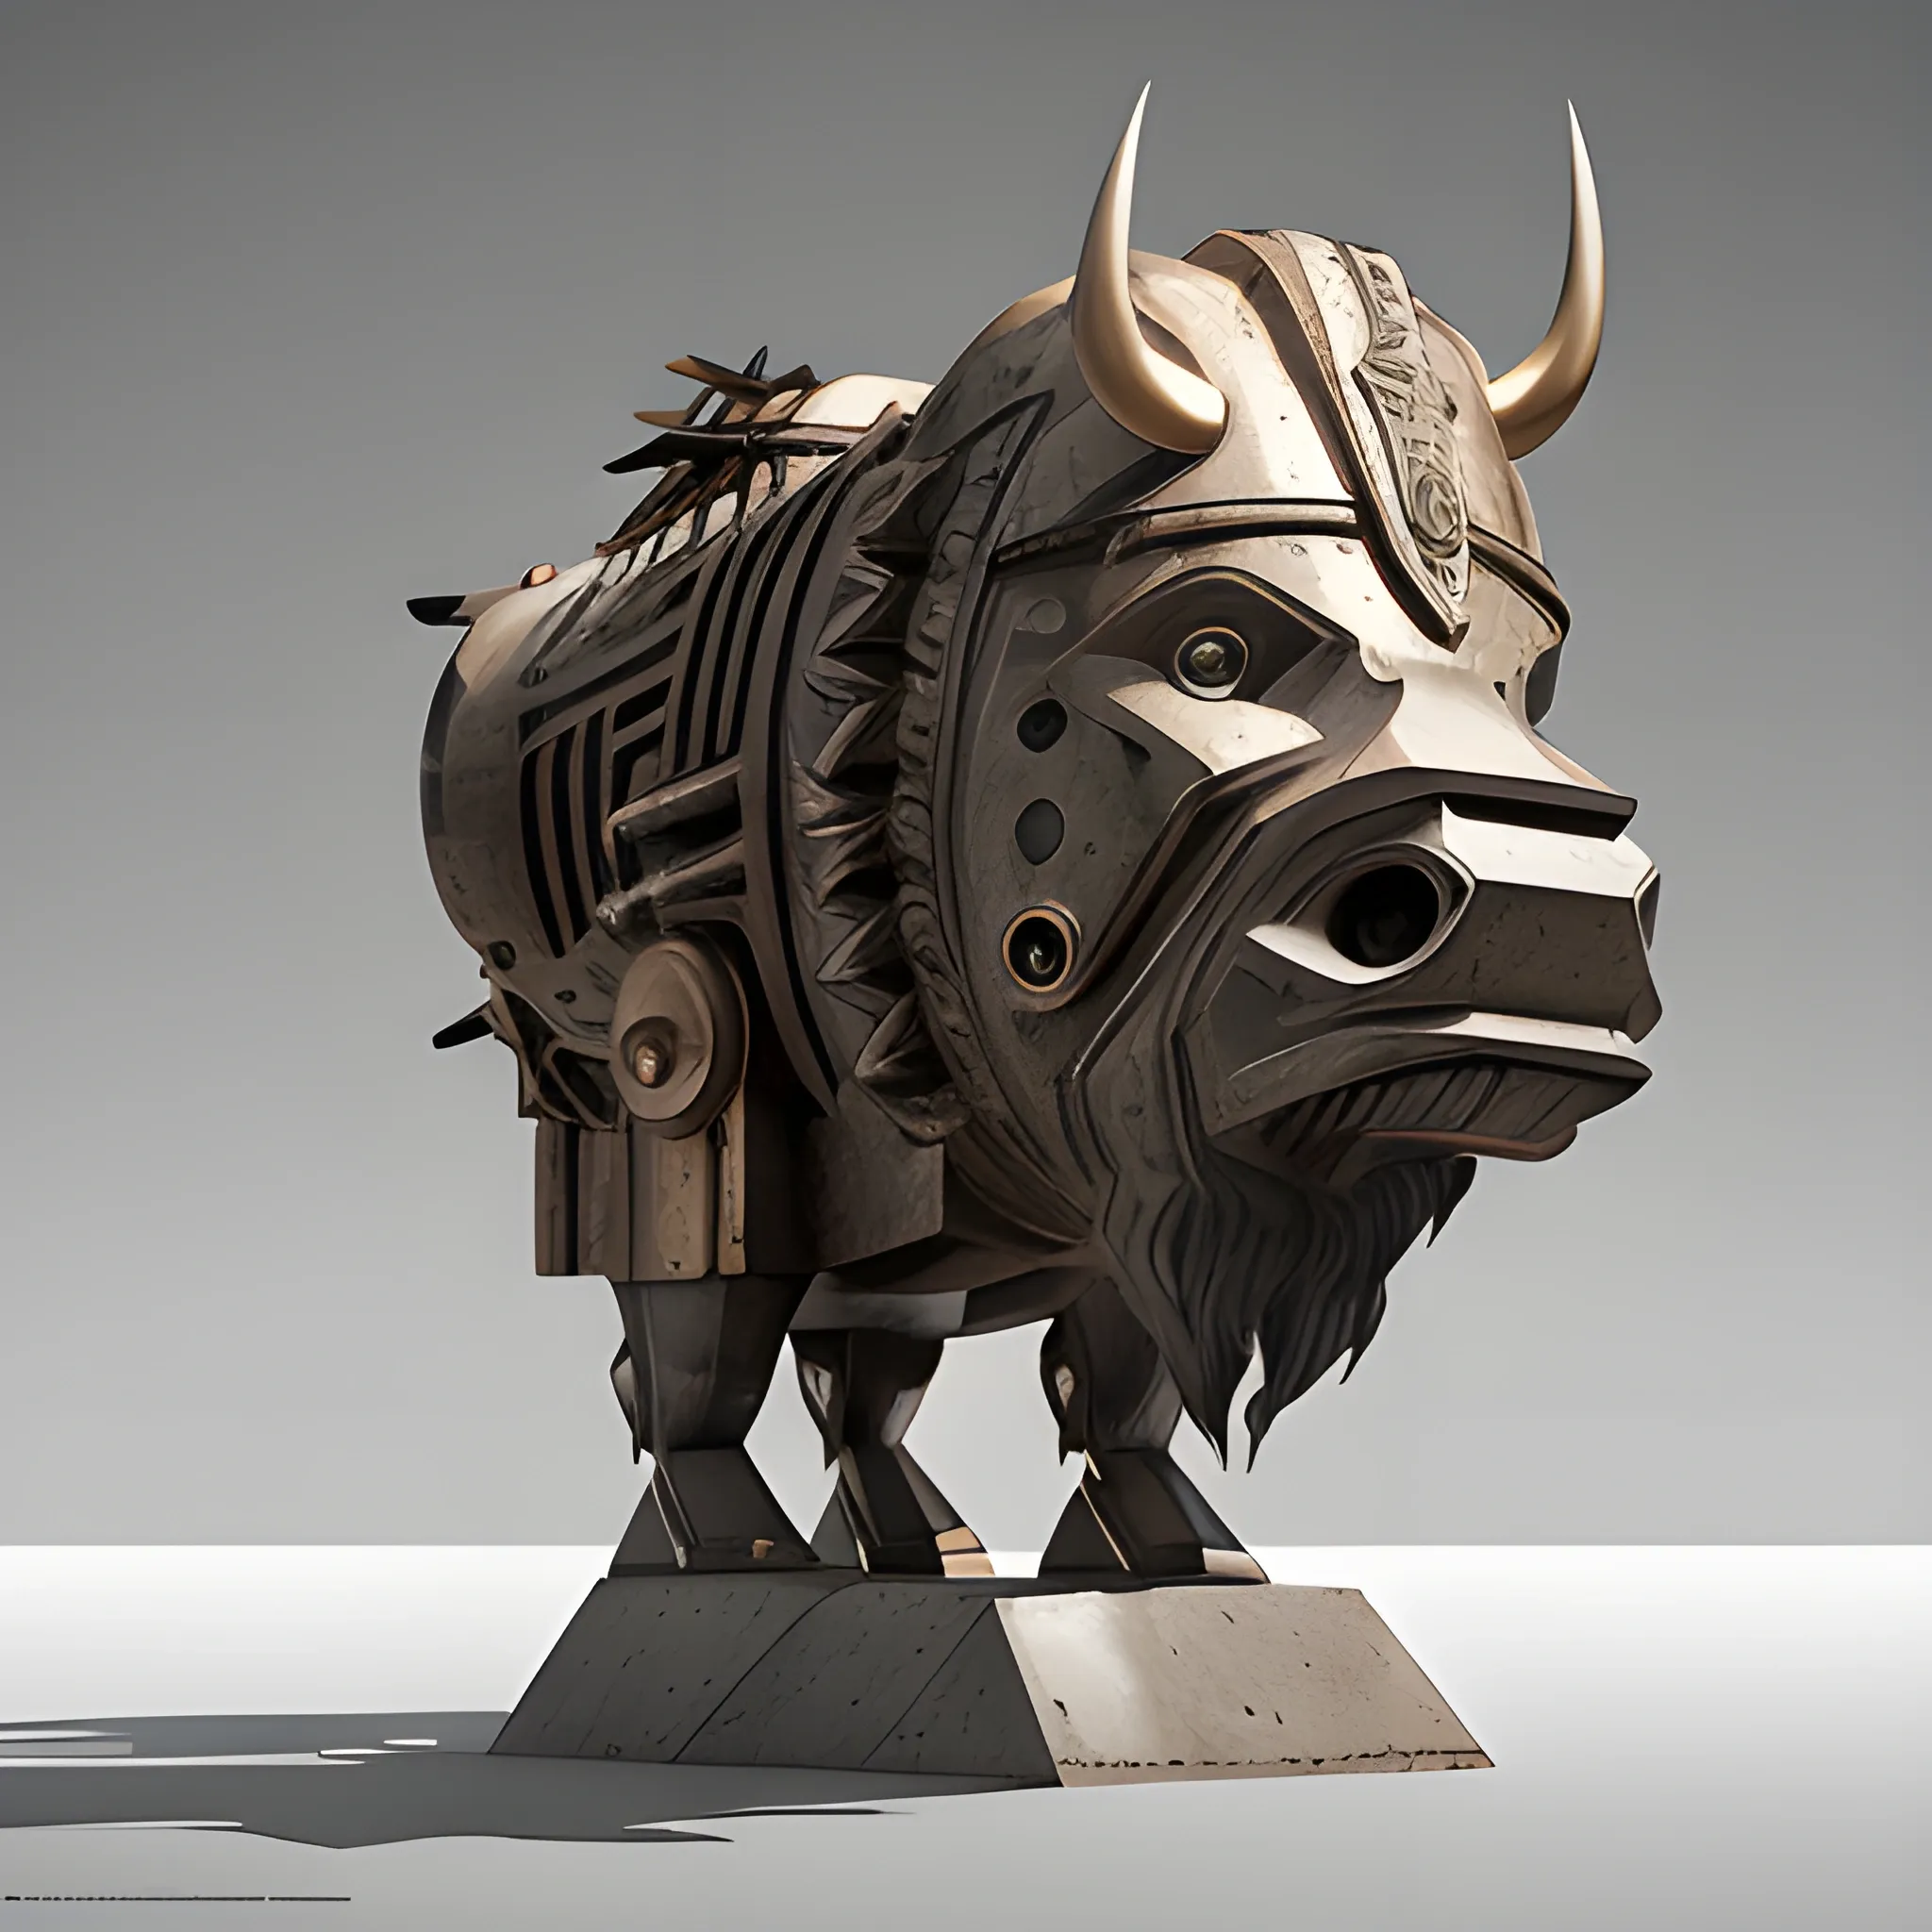 sculptural set in Brancusi style , Big metalical Bison featured native american hunters, gear and riveted steel,  digital matte realistic painting, illustration sharp focus, elegant intricate digital painting abstract concept art global illumination ray tracing advanced technology, simple composition, 

